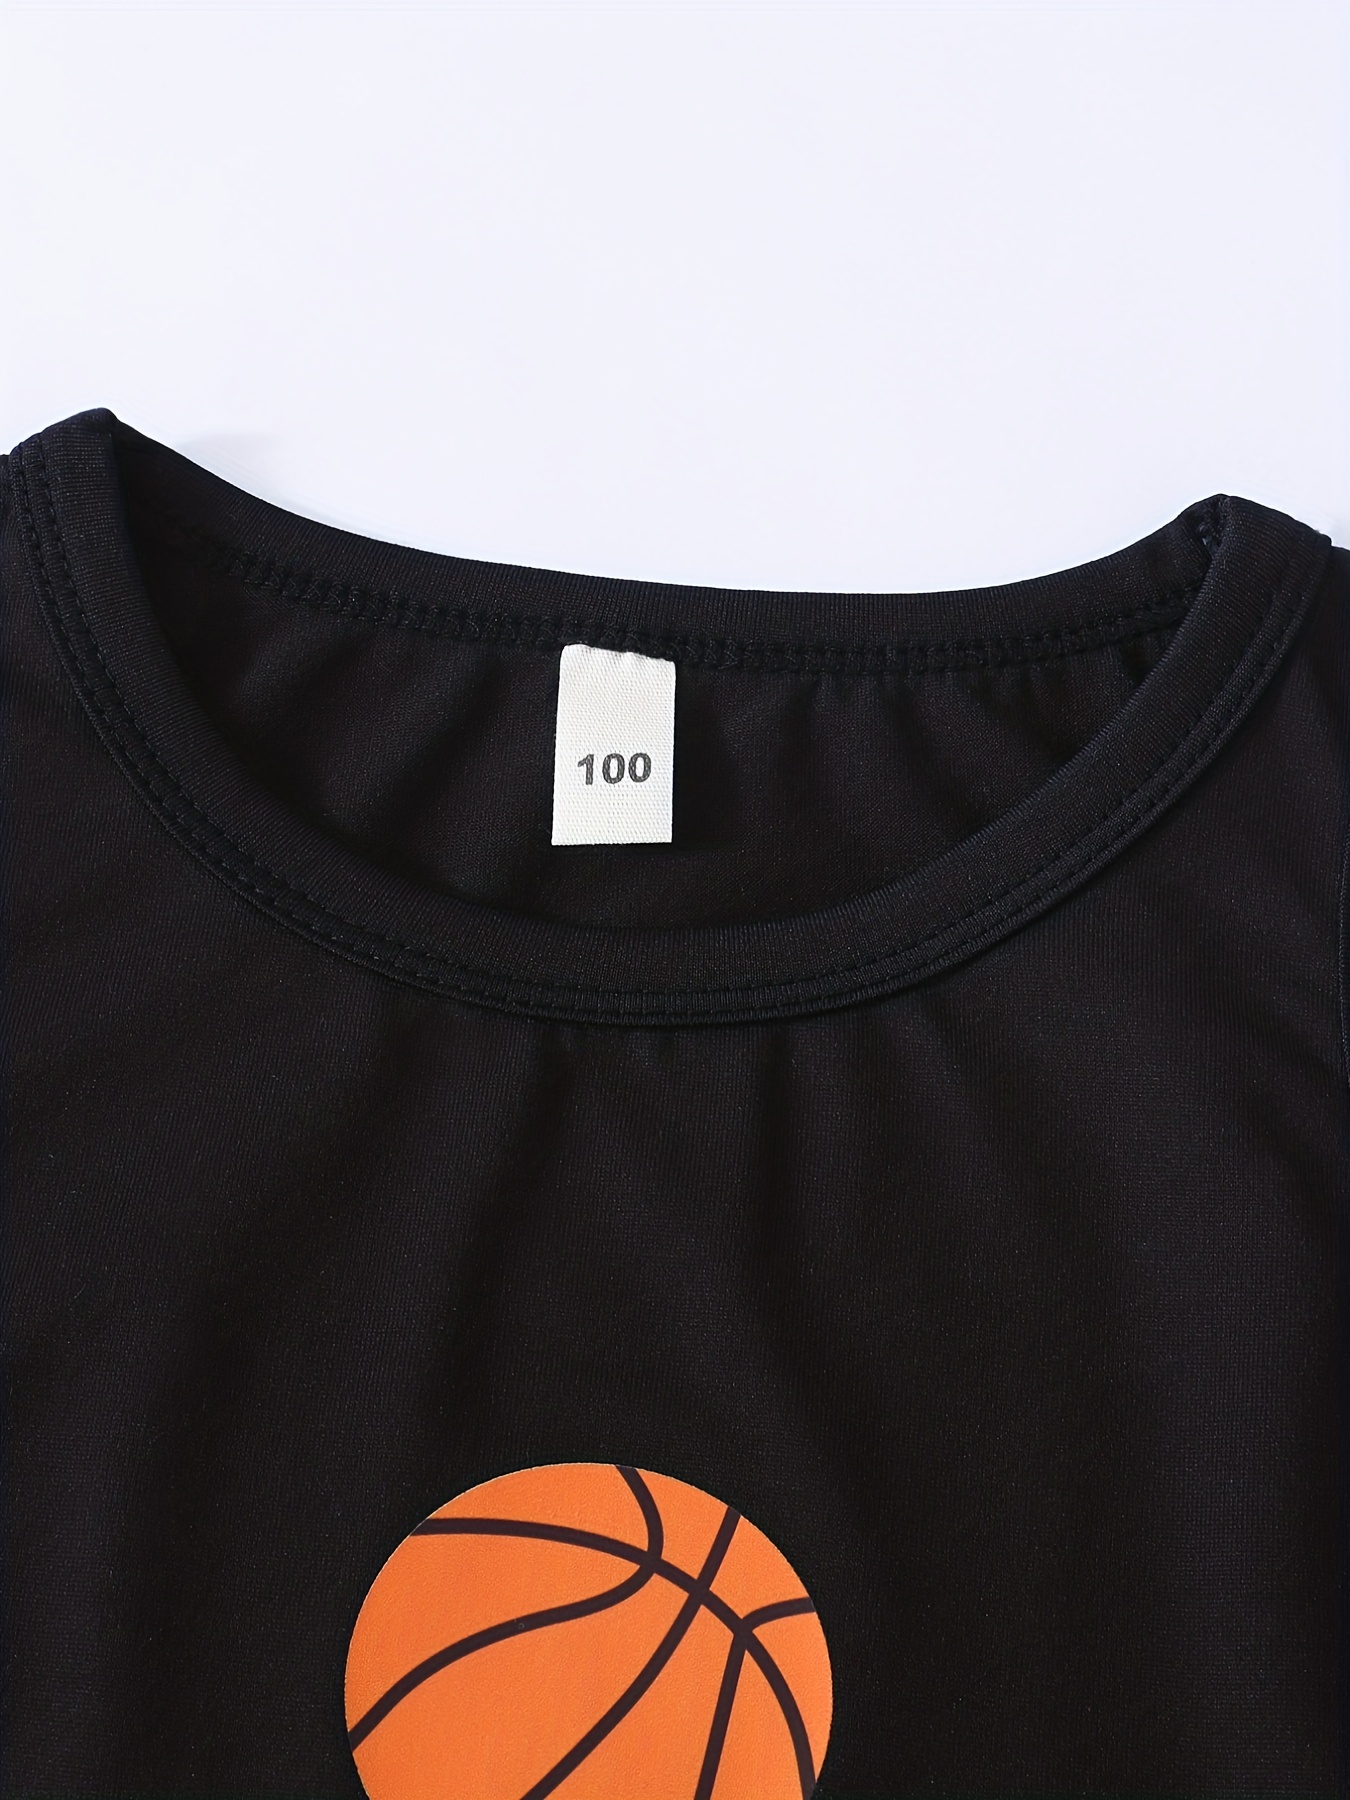 2pcs Kids Boys Breathable Sports Basketball Jersey Set, Casual Sleeveless  Vest&Shorts, Quick-drying Tank Tops And Shorts For Training Competition